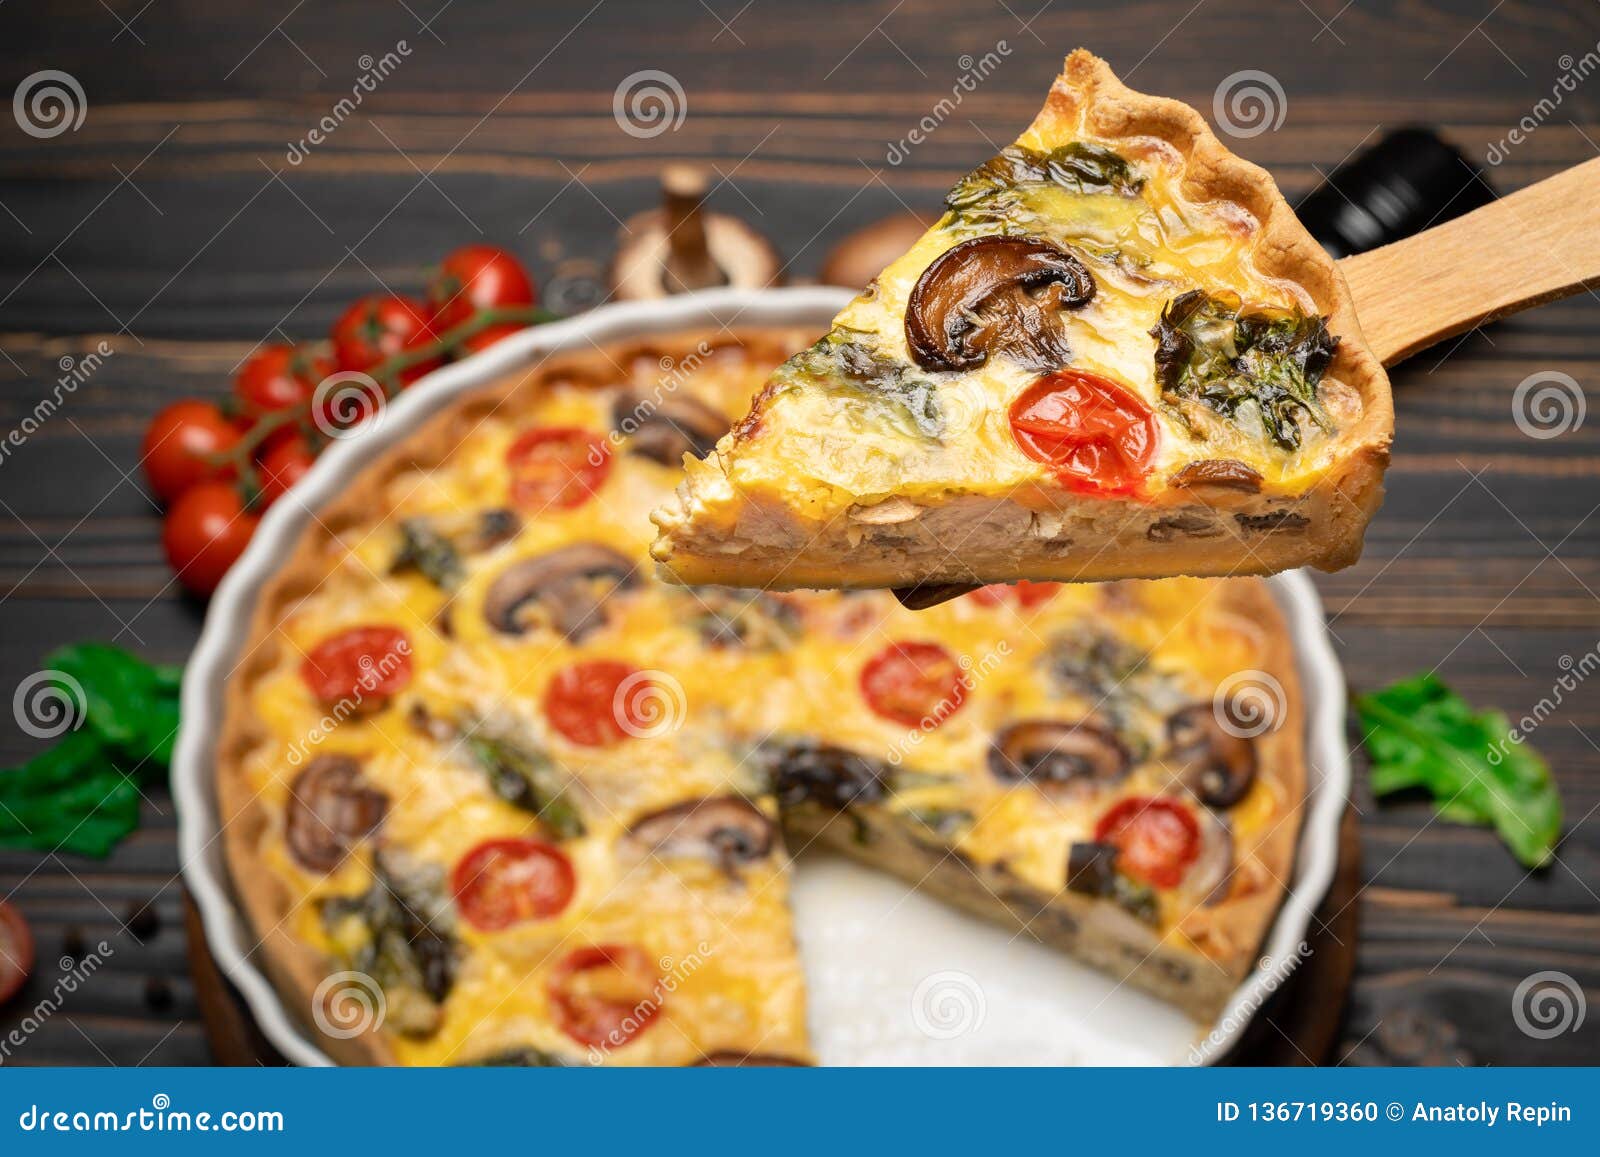 Slice of Traditonal Homemade Spinach Chicken Quiche Tart or Pie on ...